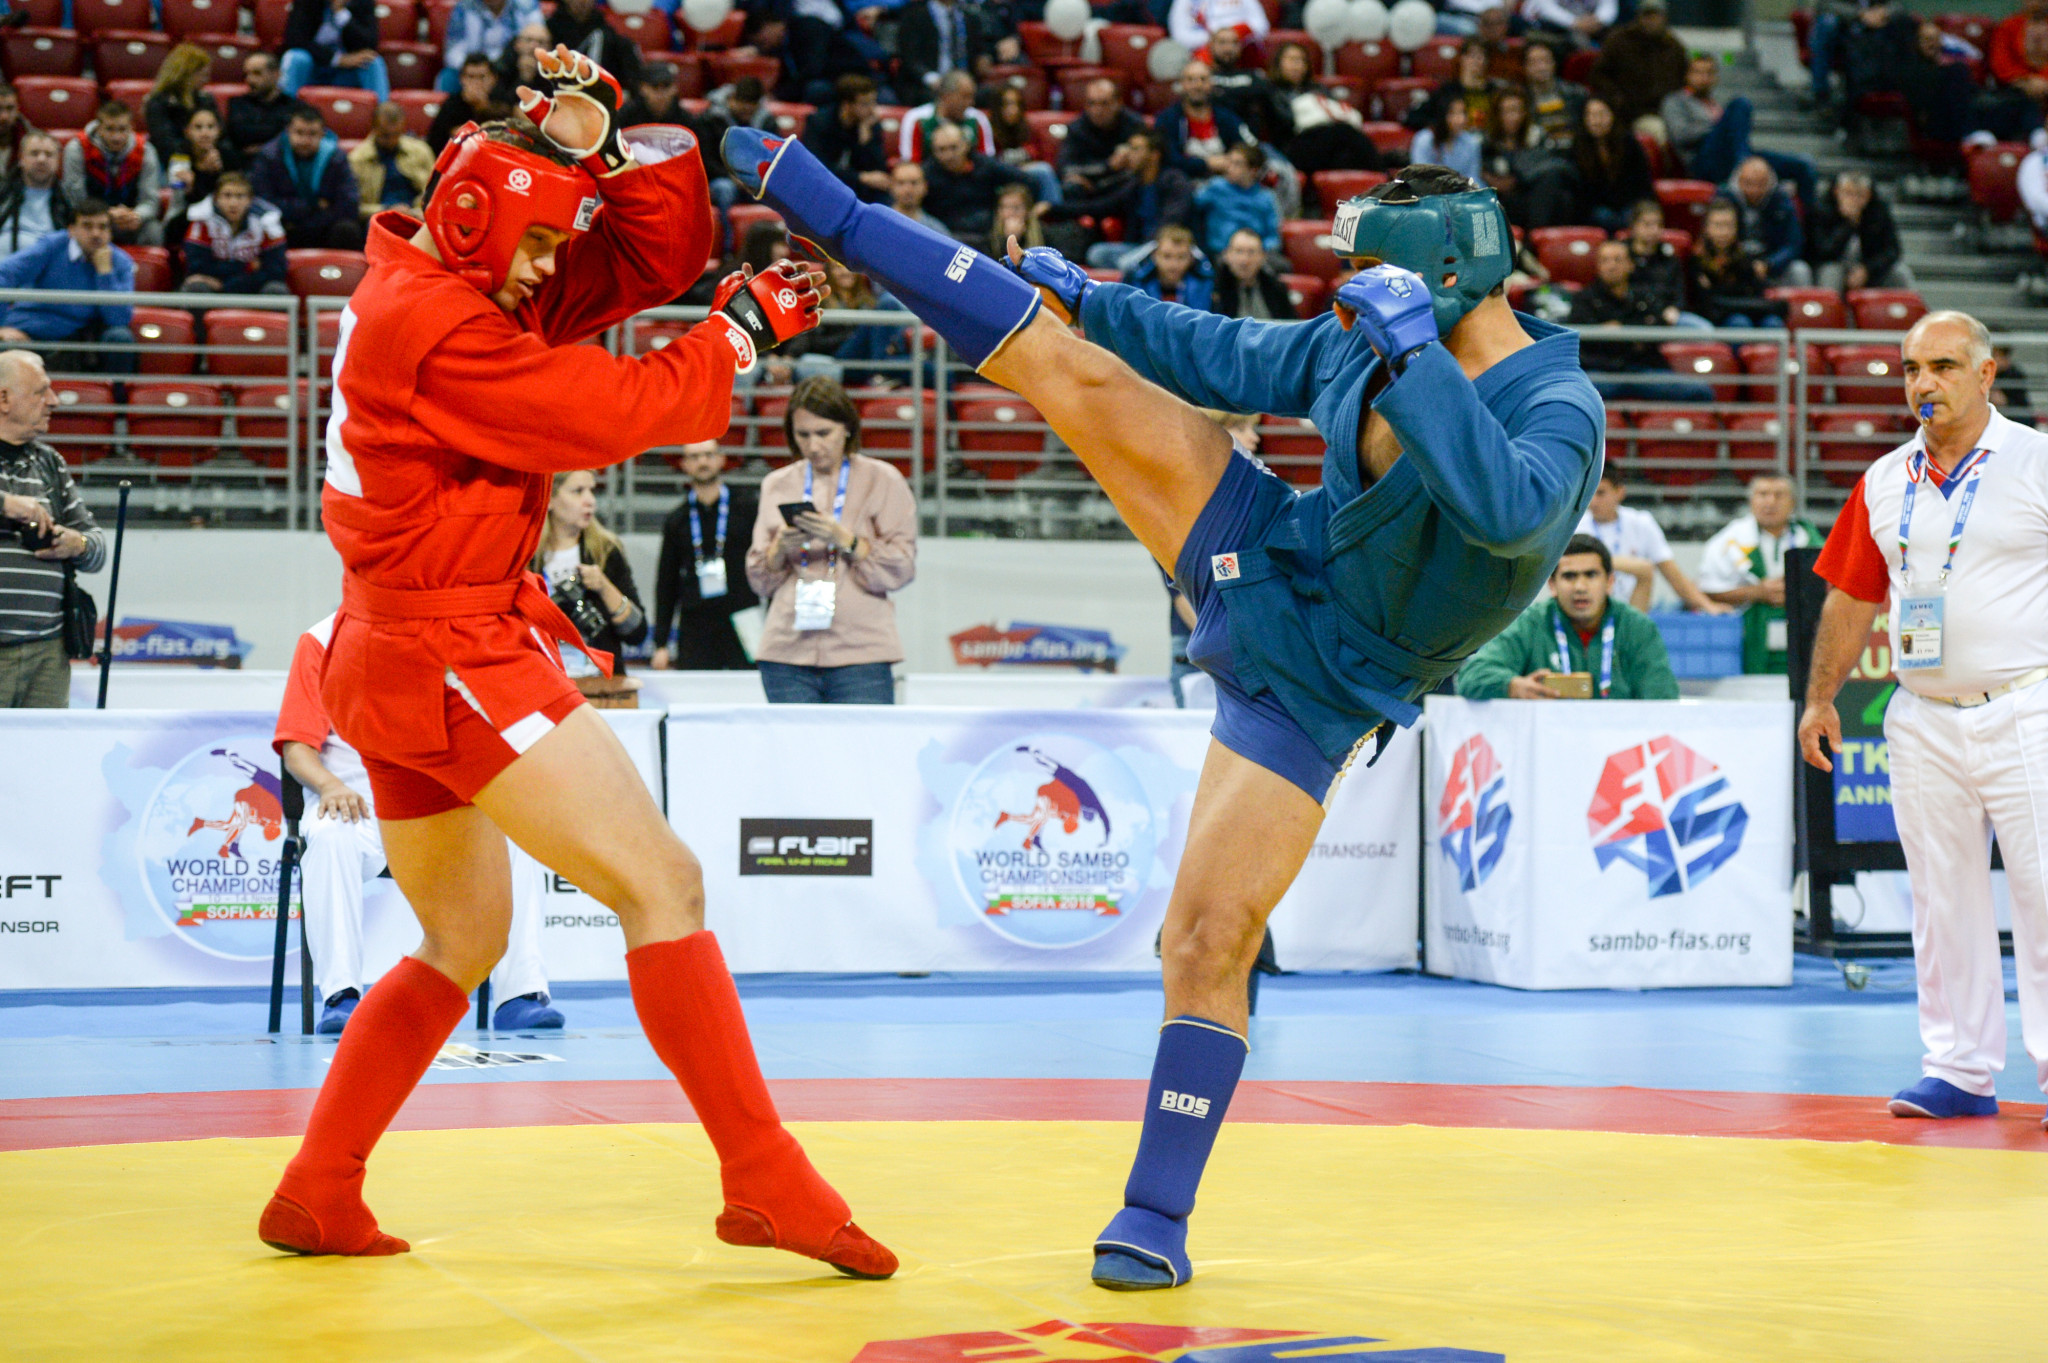 Only men currently compete in combat sambo at the World Championships ©FIAS